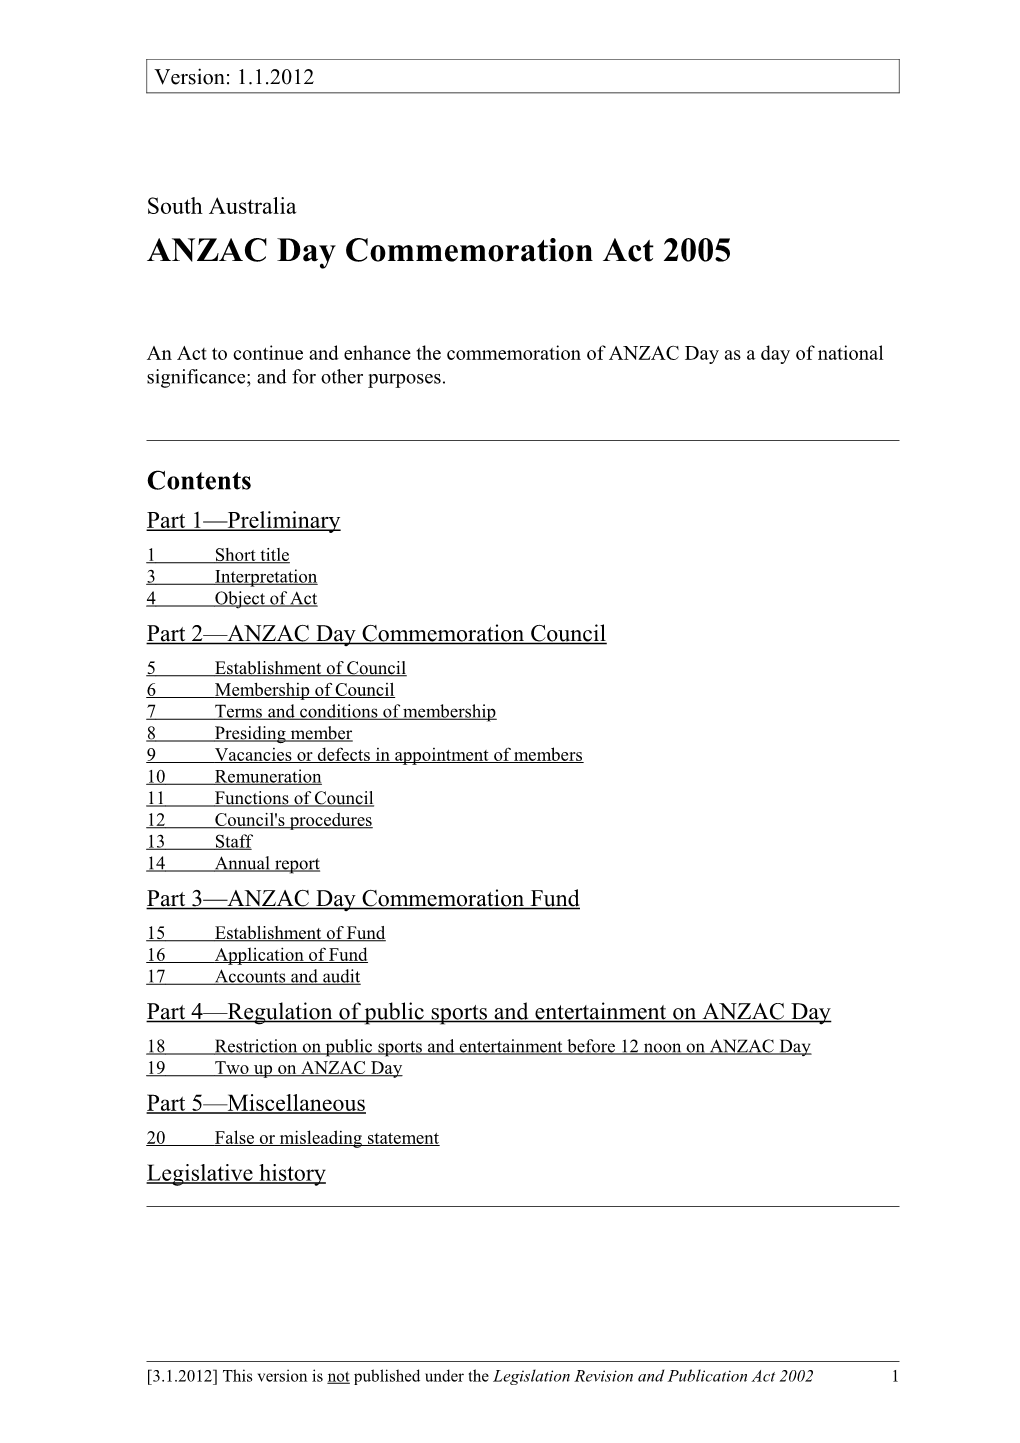 ANZAC Day Commemoration Act 2005